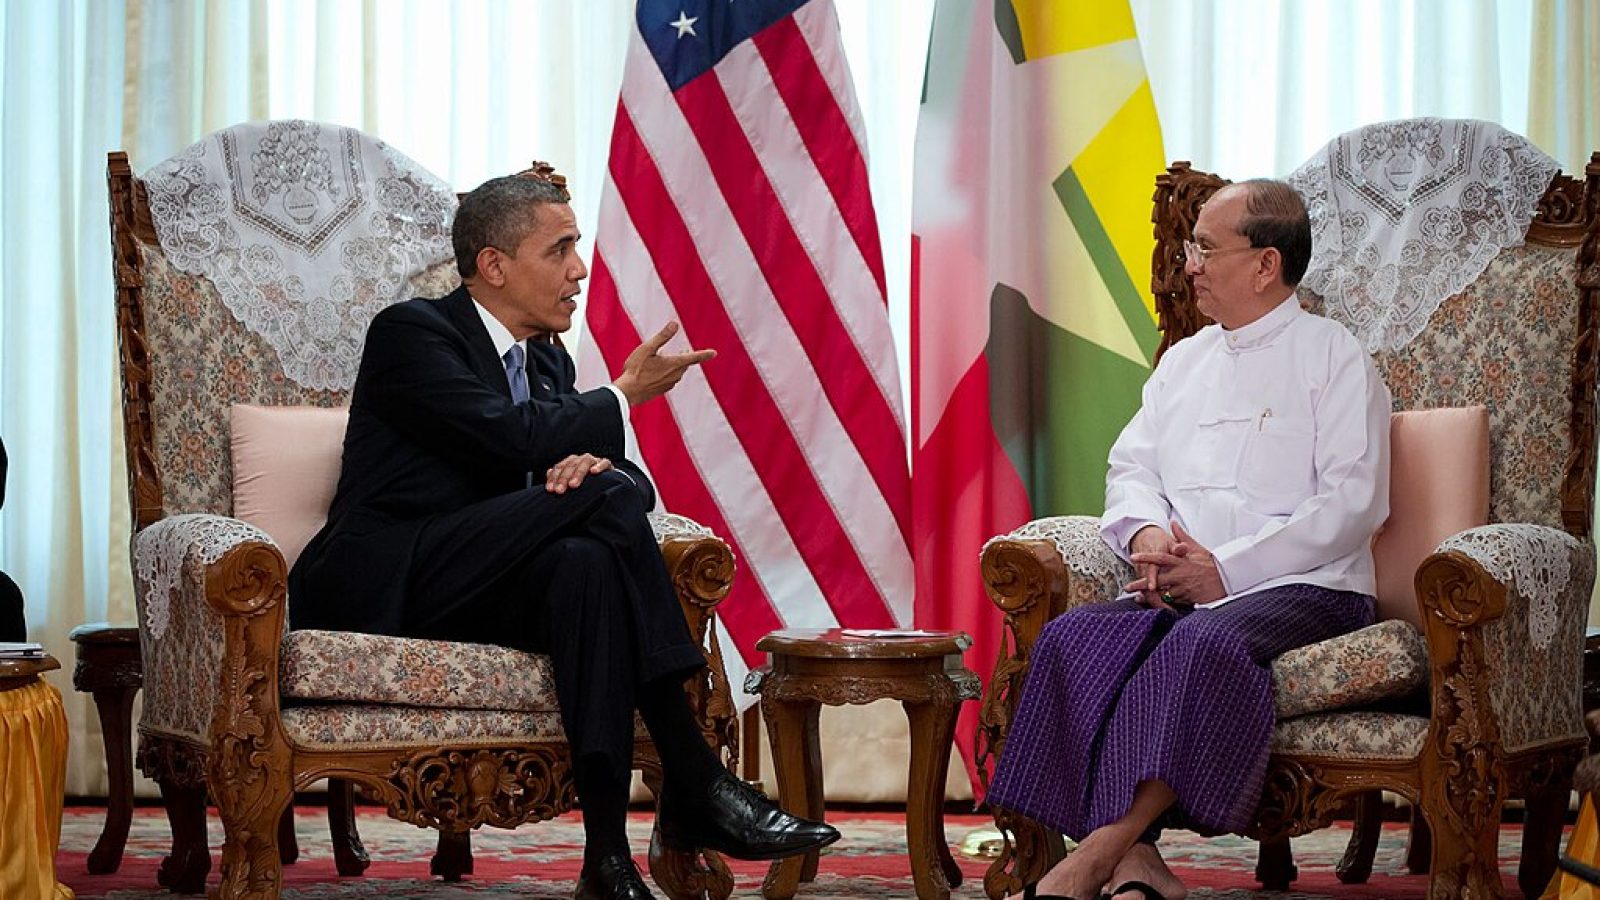 Barack Obama meeting with President Thein Sein of Myanmar